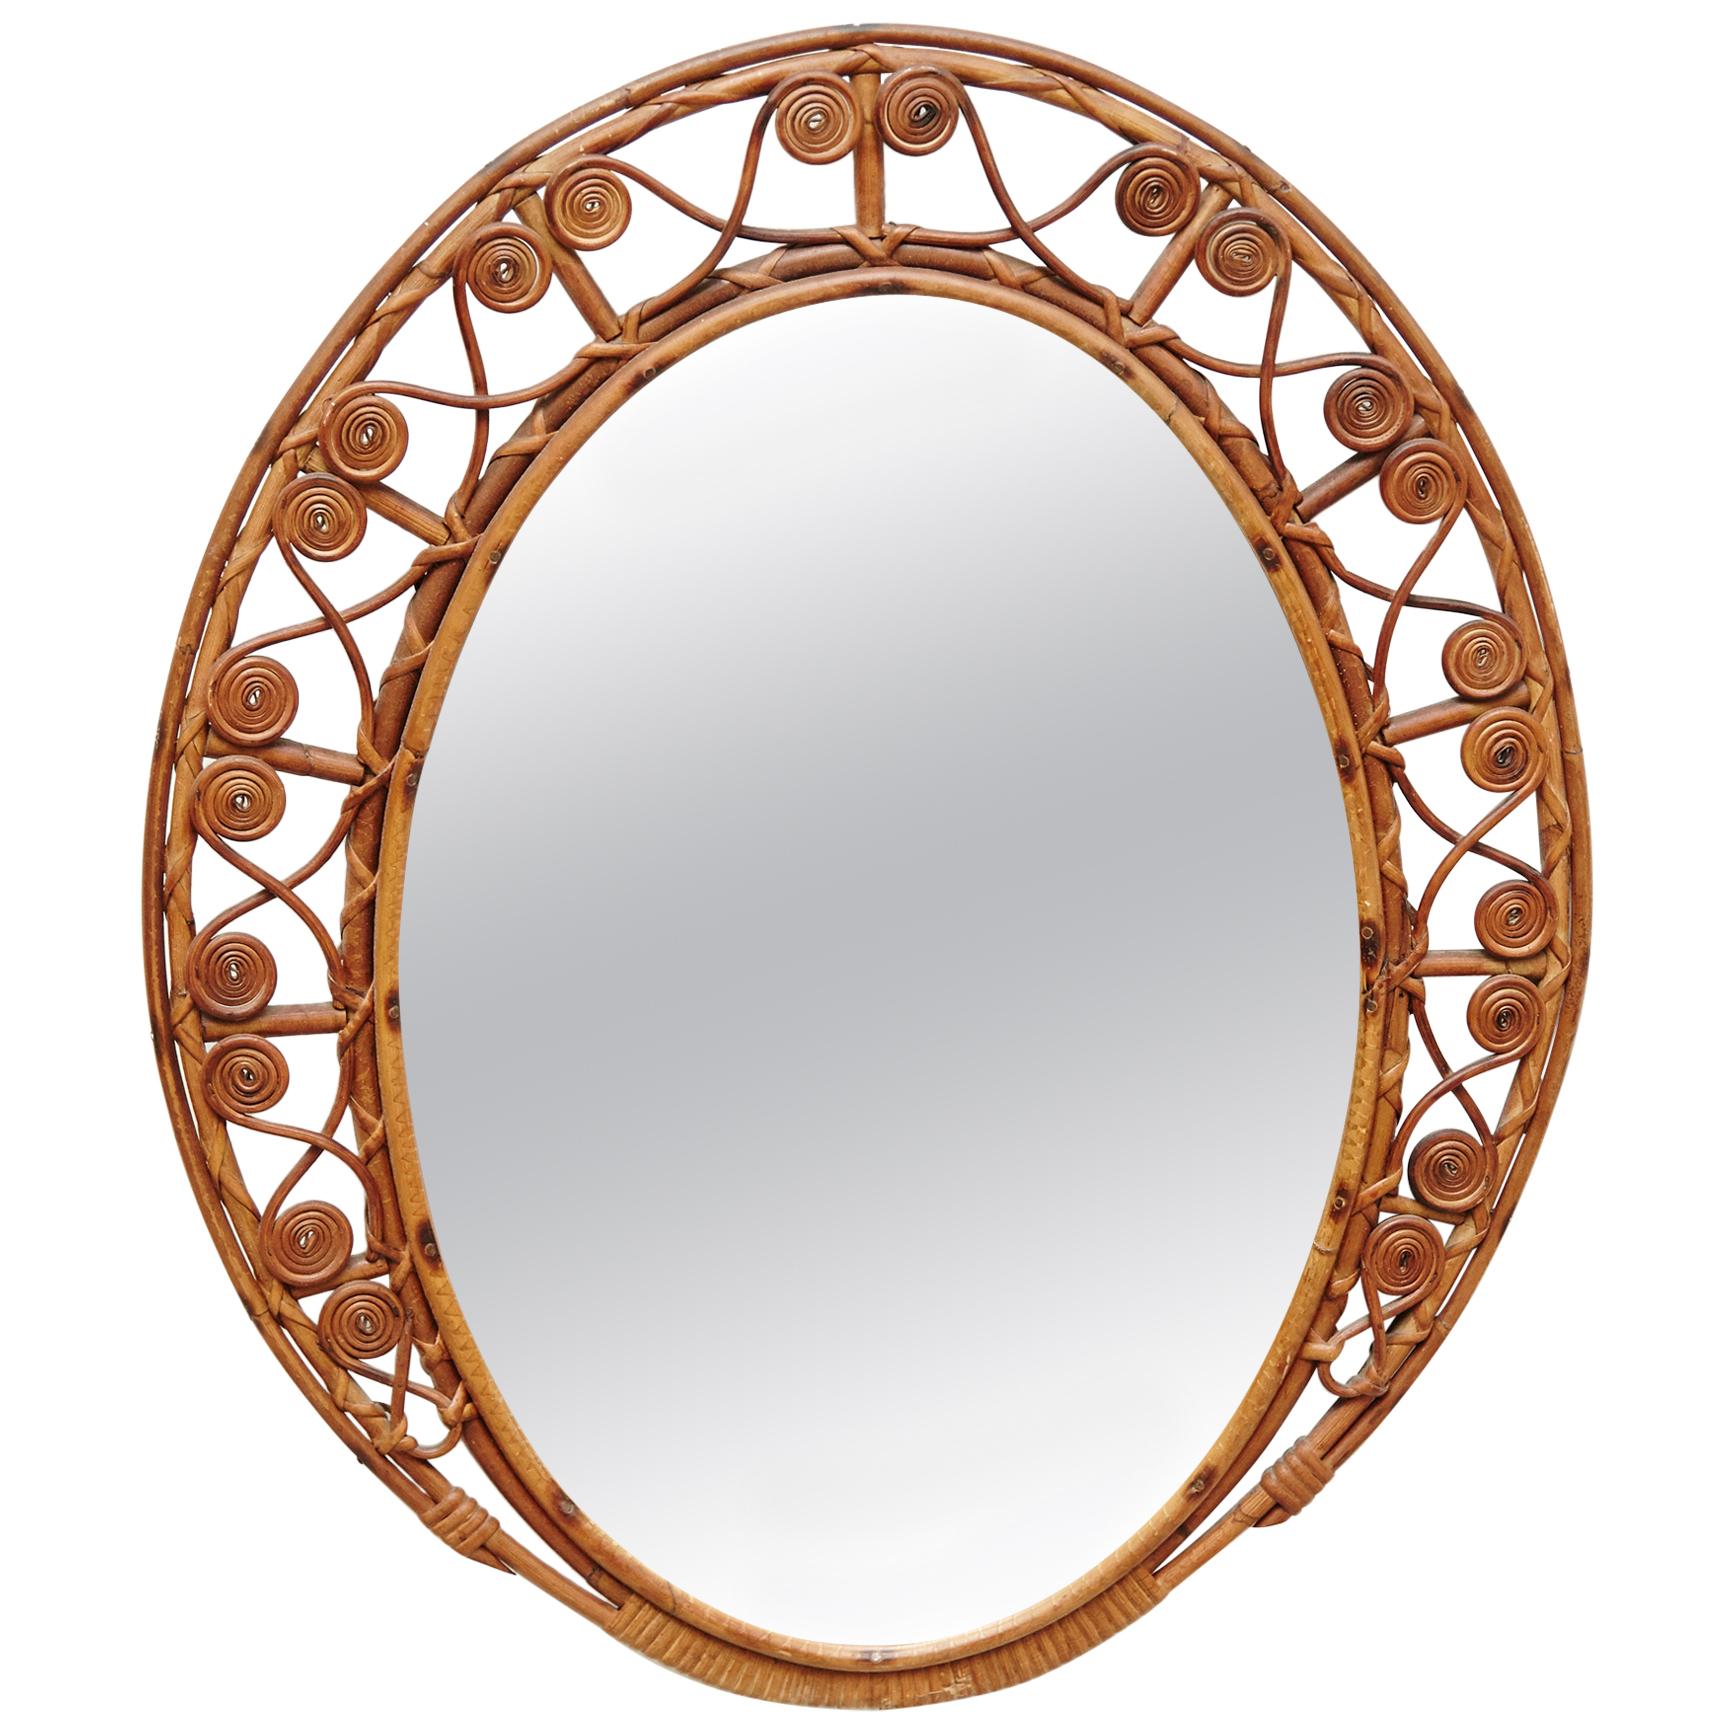 19th Century Oval Antique Rattan Wall Mirror